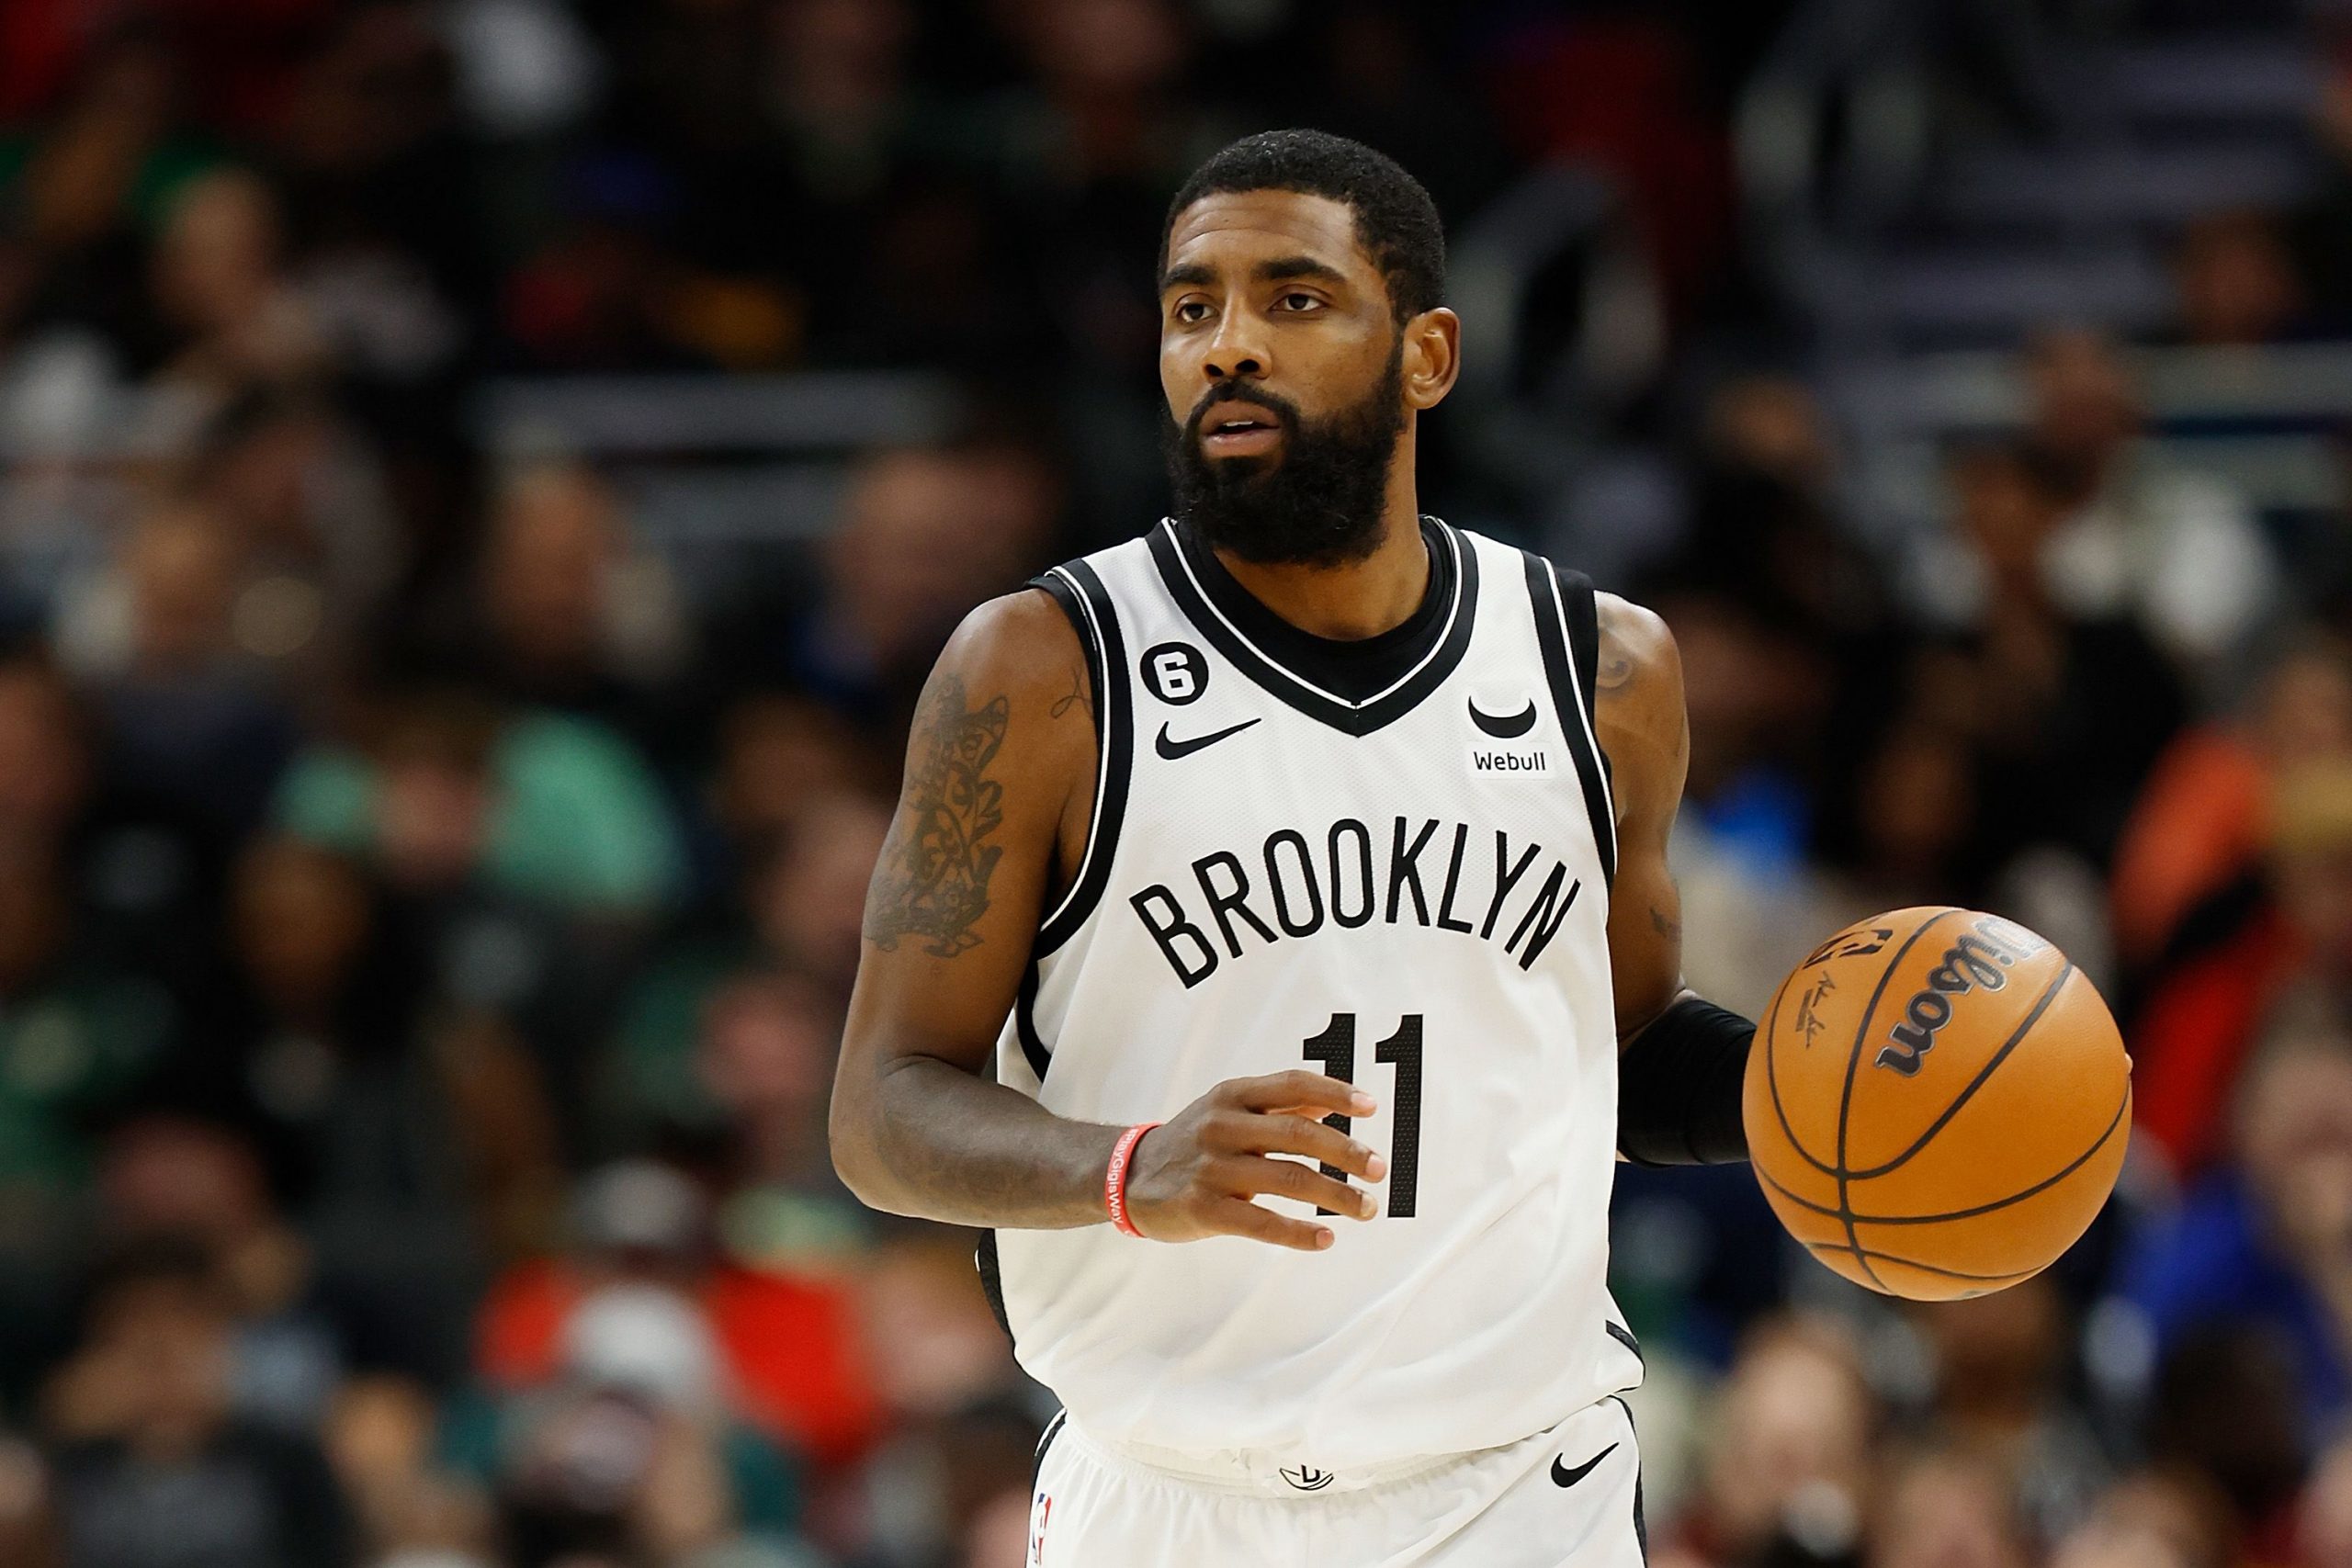 Nike suspends sponsorship deal with Brooklyn Nets’ Kyrie Irving over anti-Semitic tweet